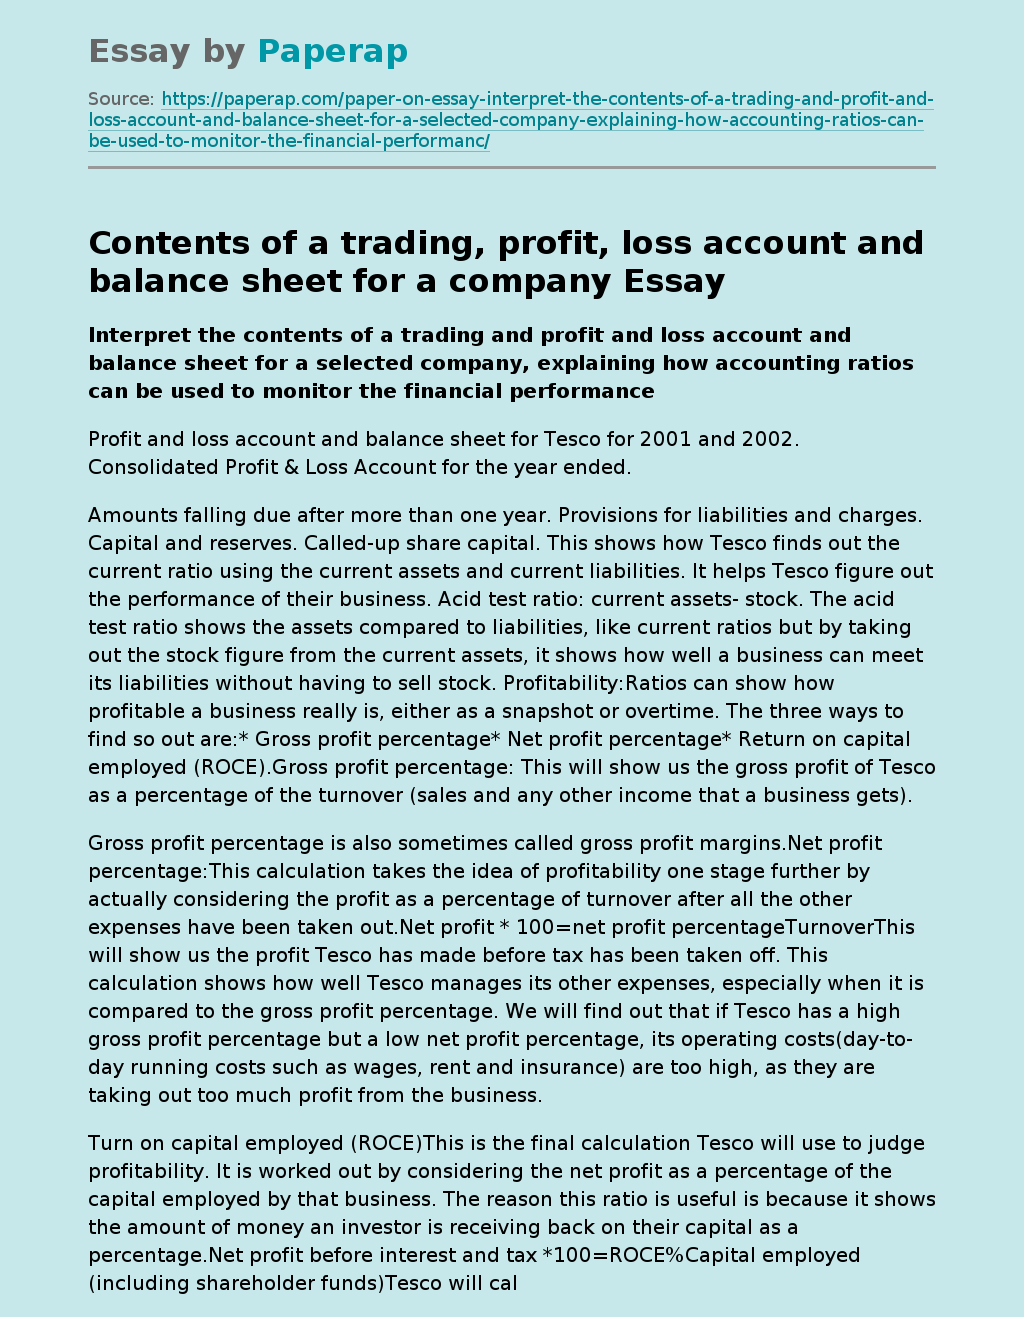 Contents of a trading, profit, loss account and balance sheet for a company